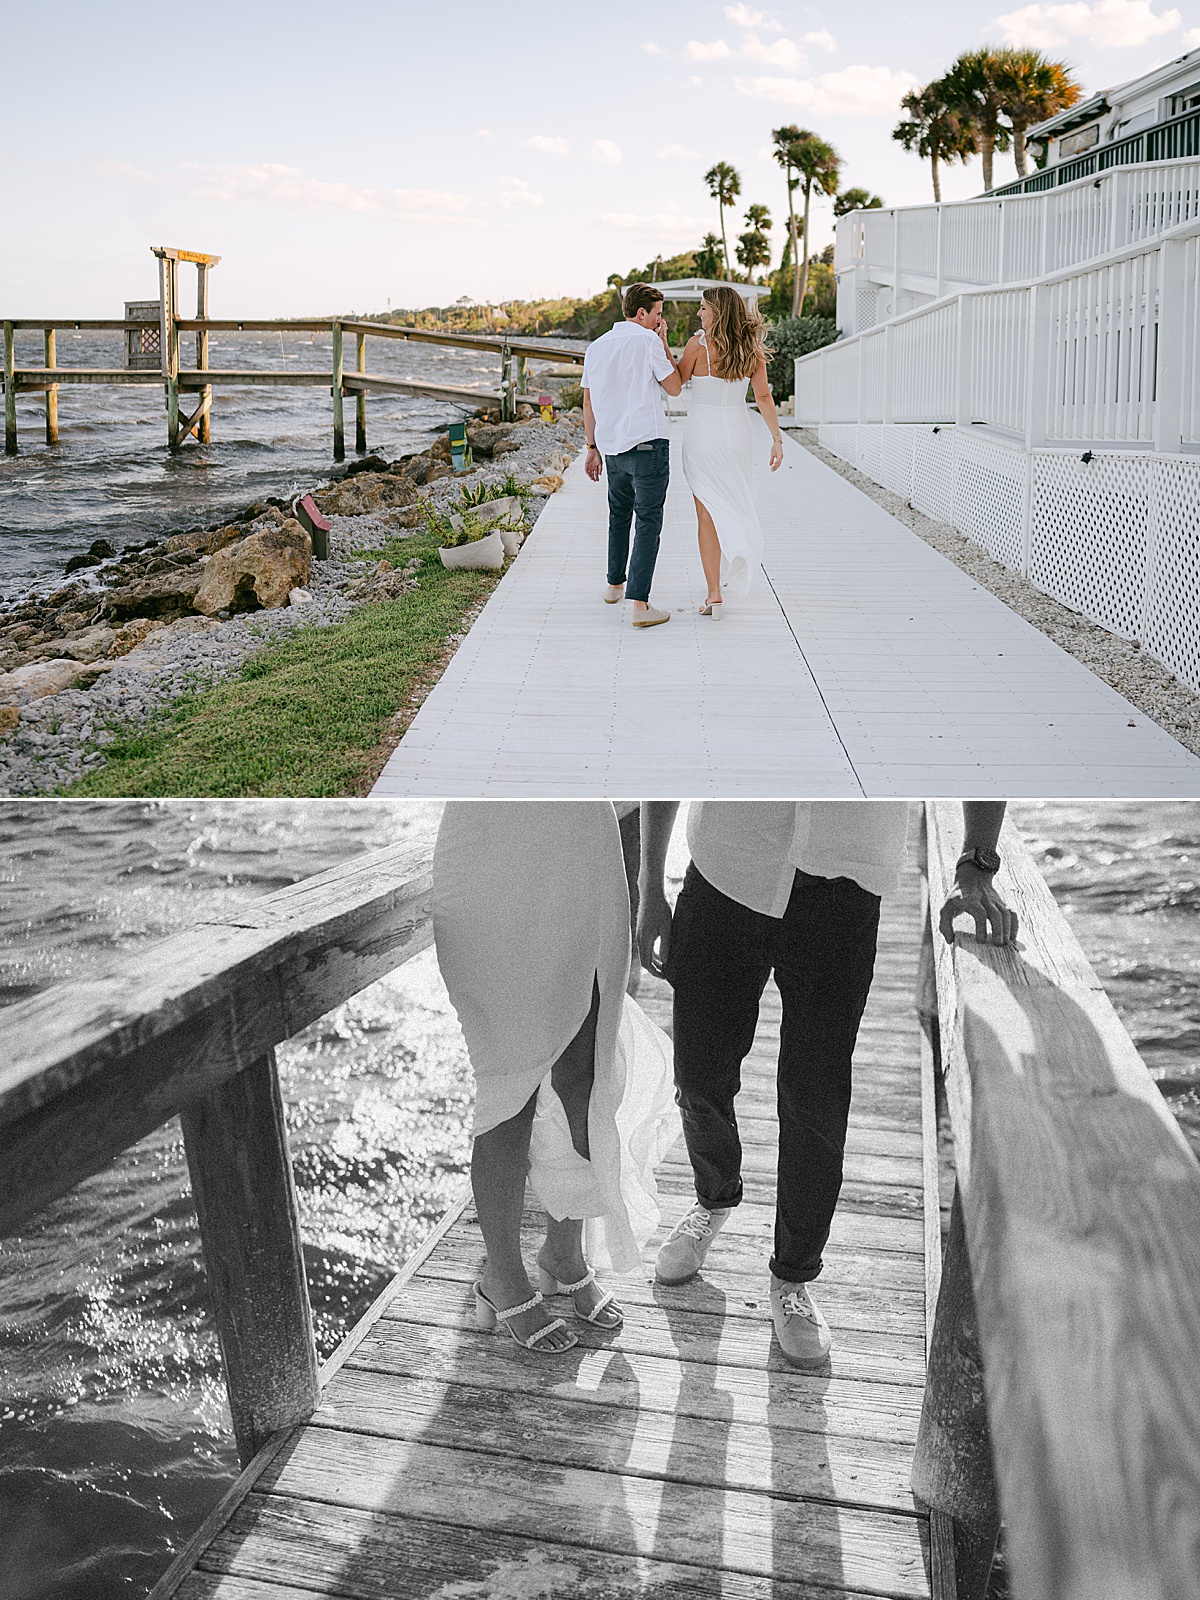 Bride and groom walking on a dock in Malabar, Florida at sunset.